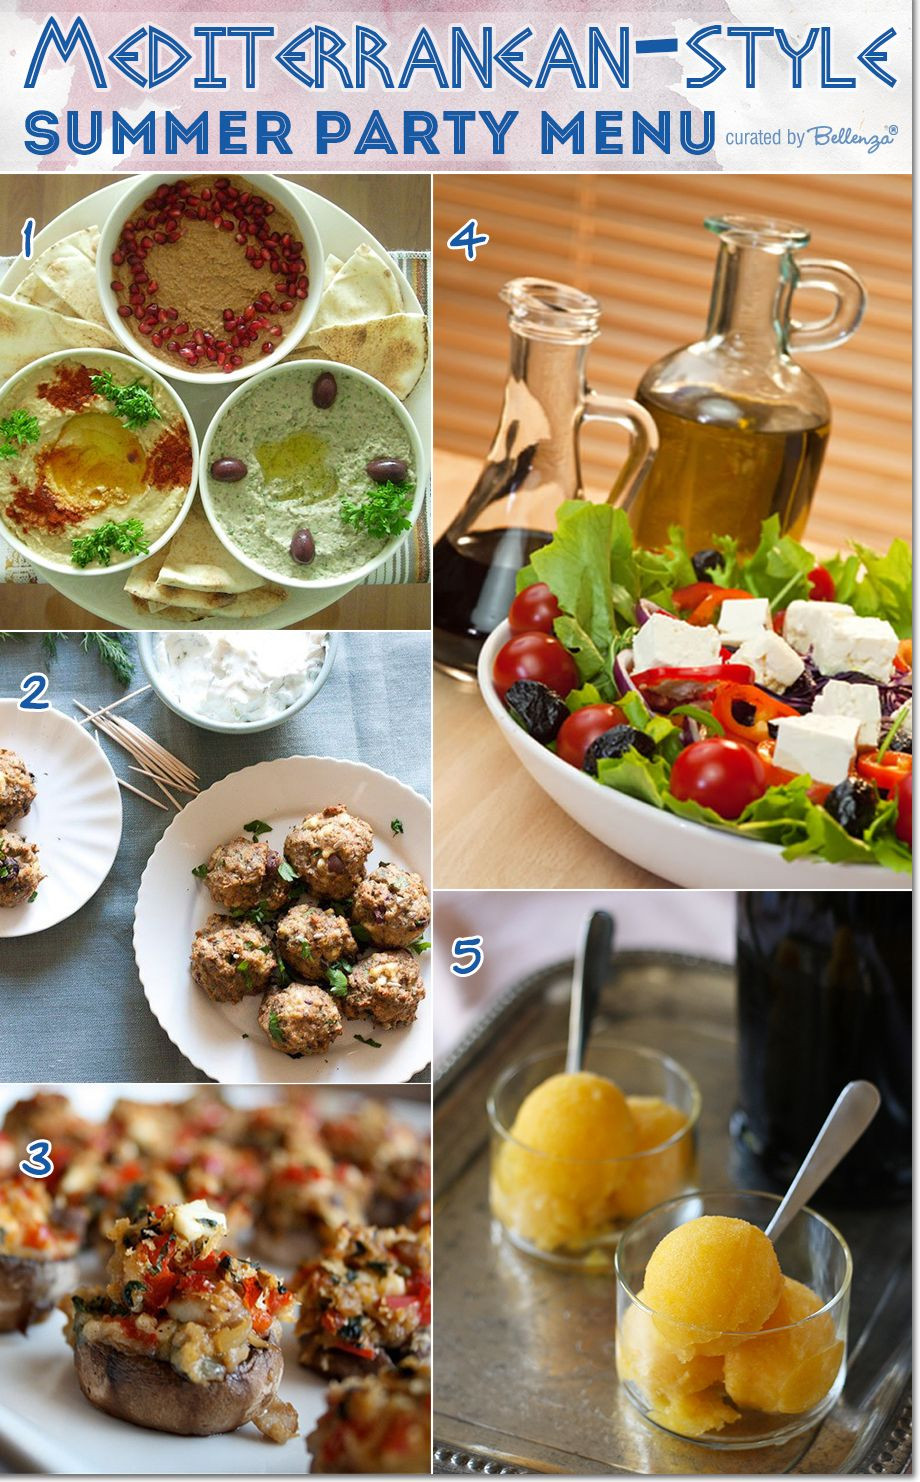 Summer Party Food Ideas Recipes
 Menu Ideas for Hosting a Mediterranean style Summer Party